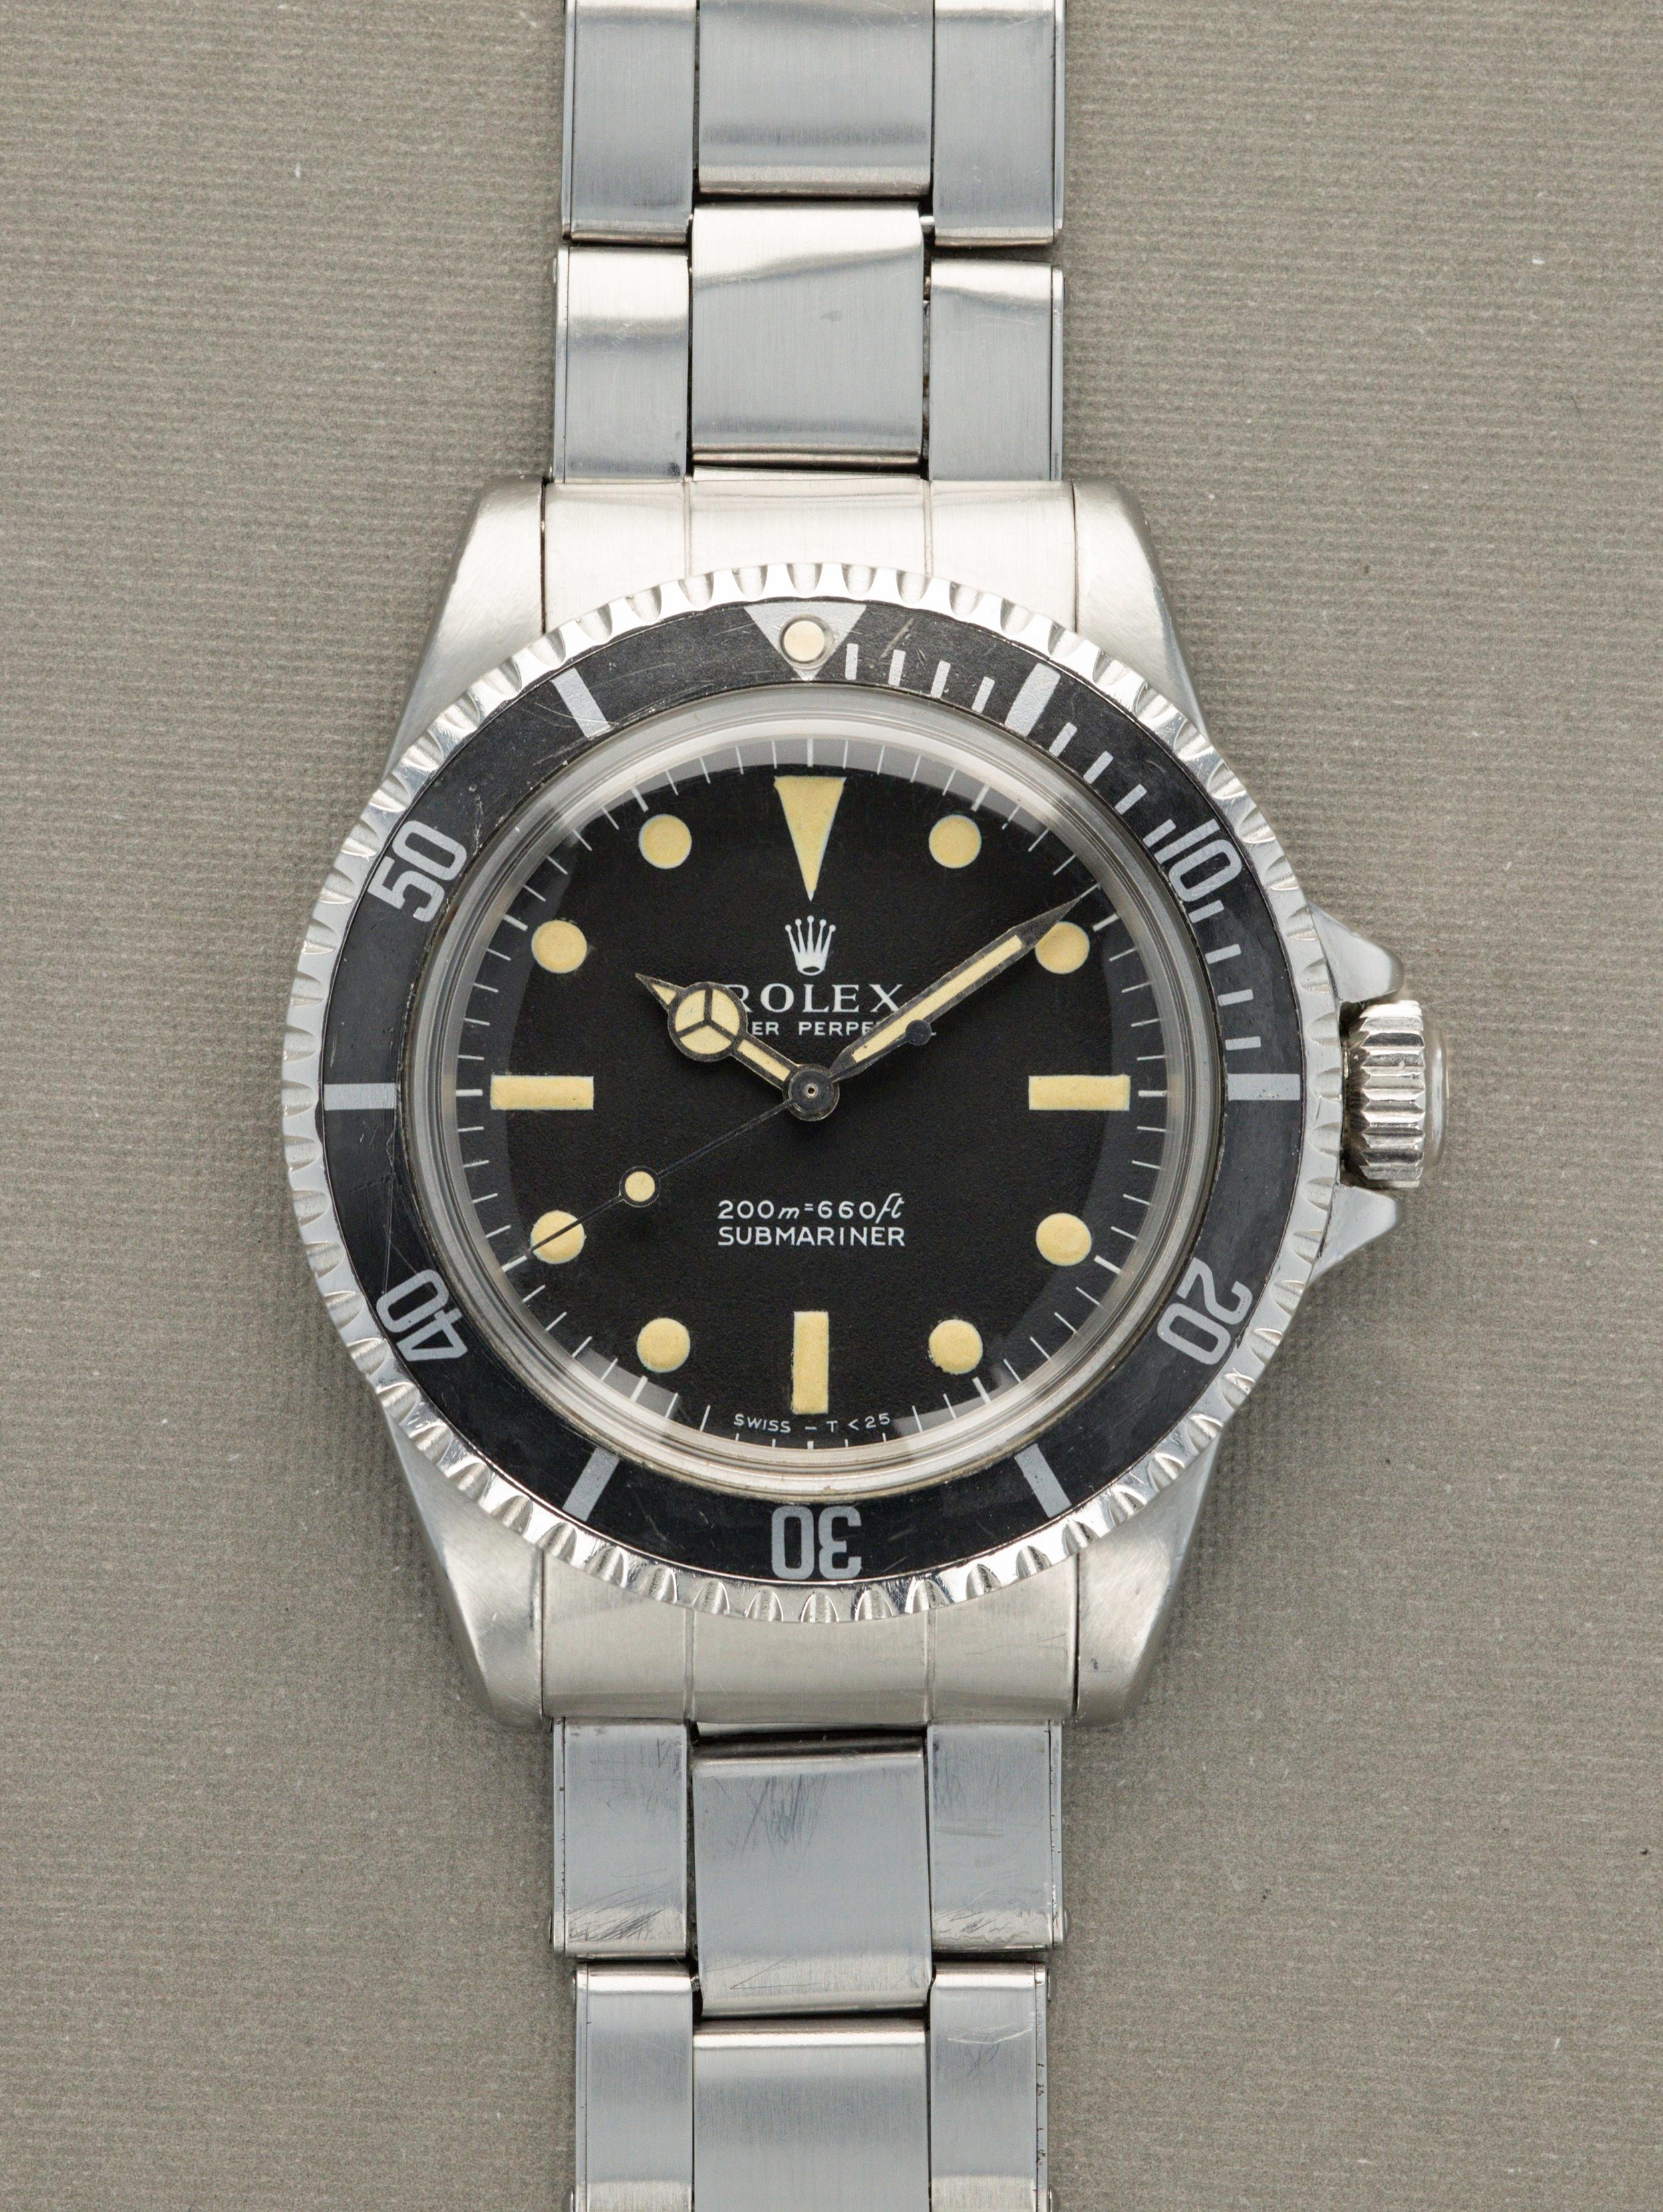 Rolex Submariner Ref. 5513 - Meters First Dial